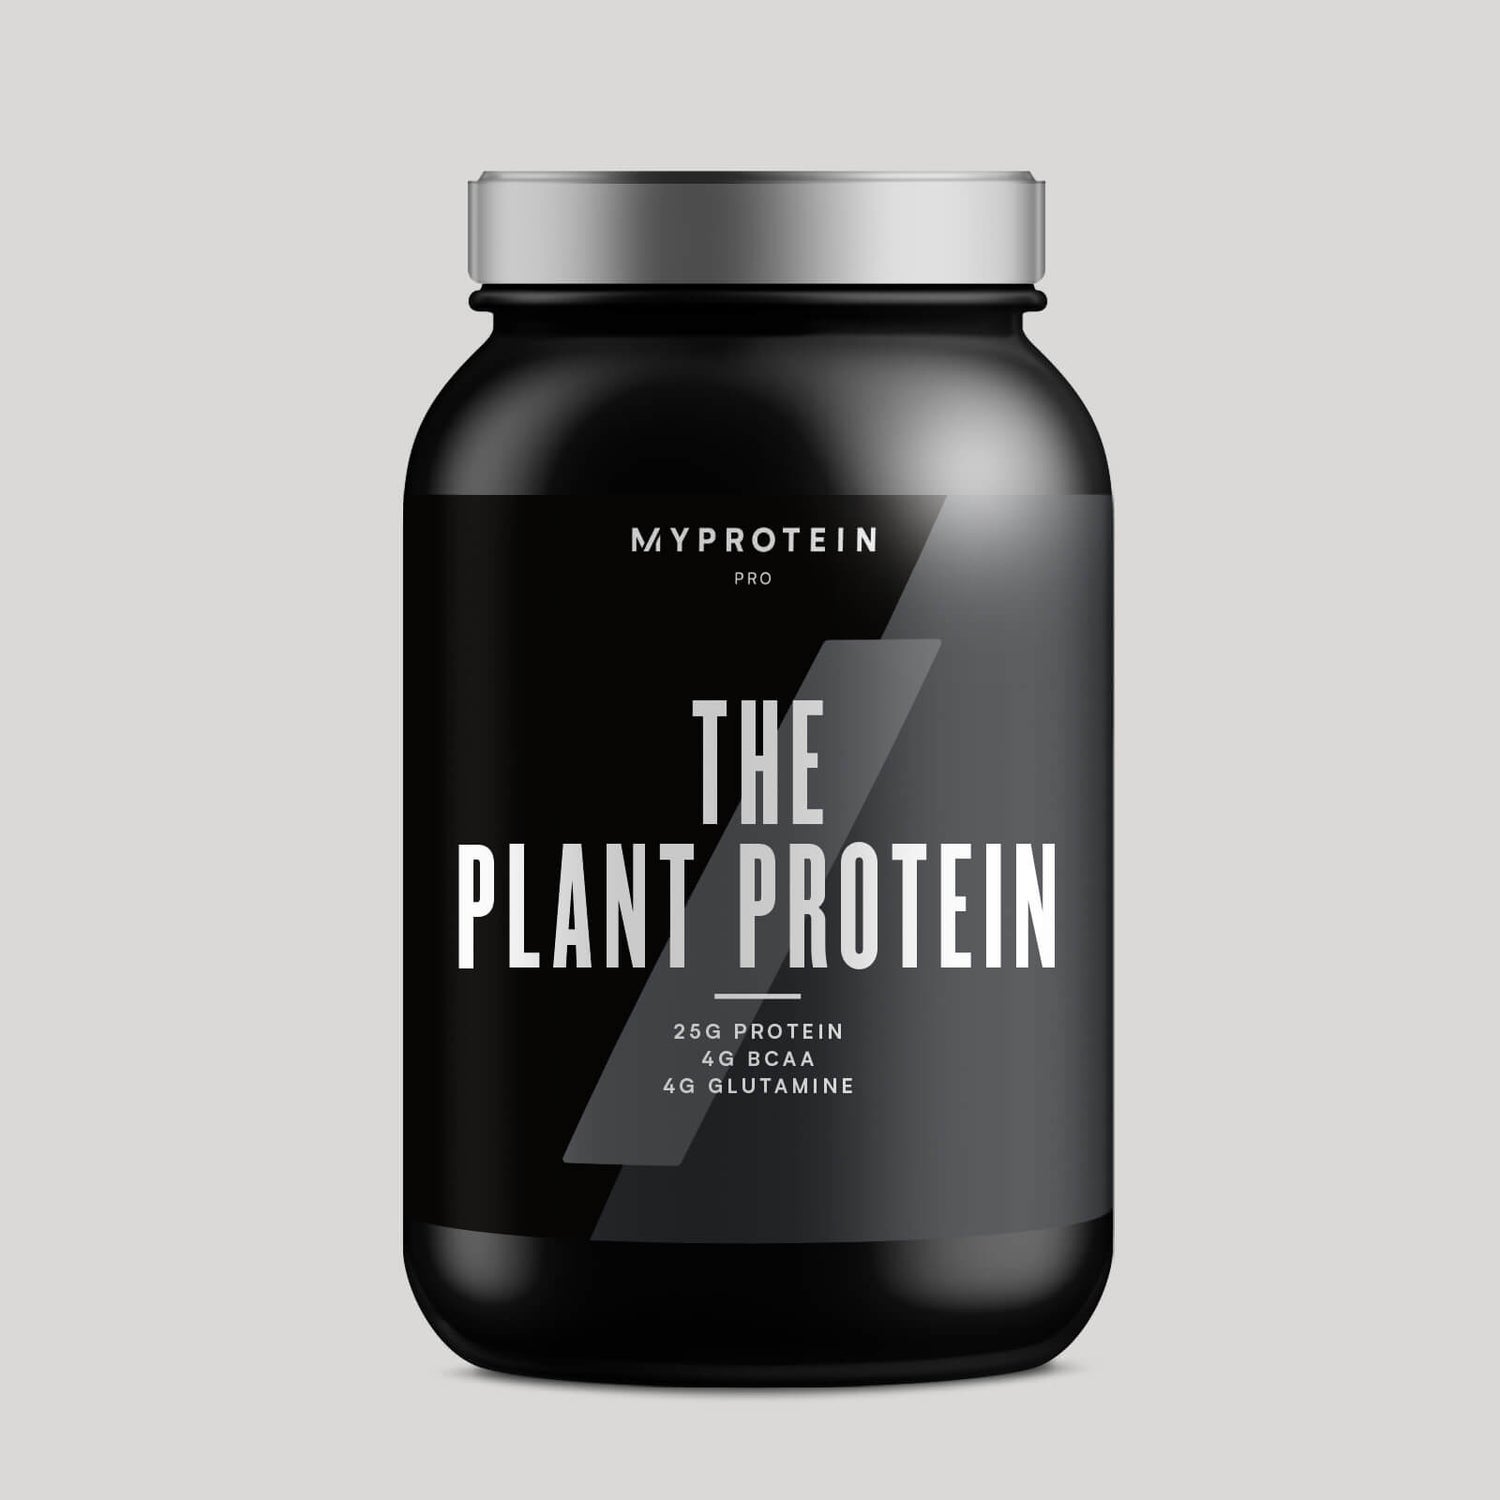 Myprotein The Plant Protein, Flavor Mocha, 60 Servings